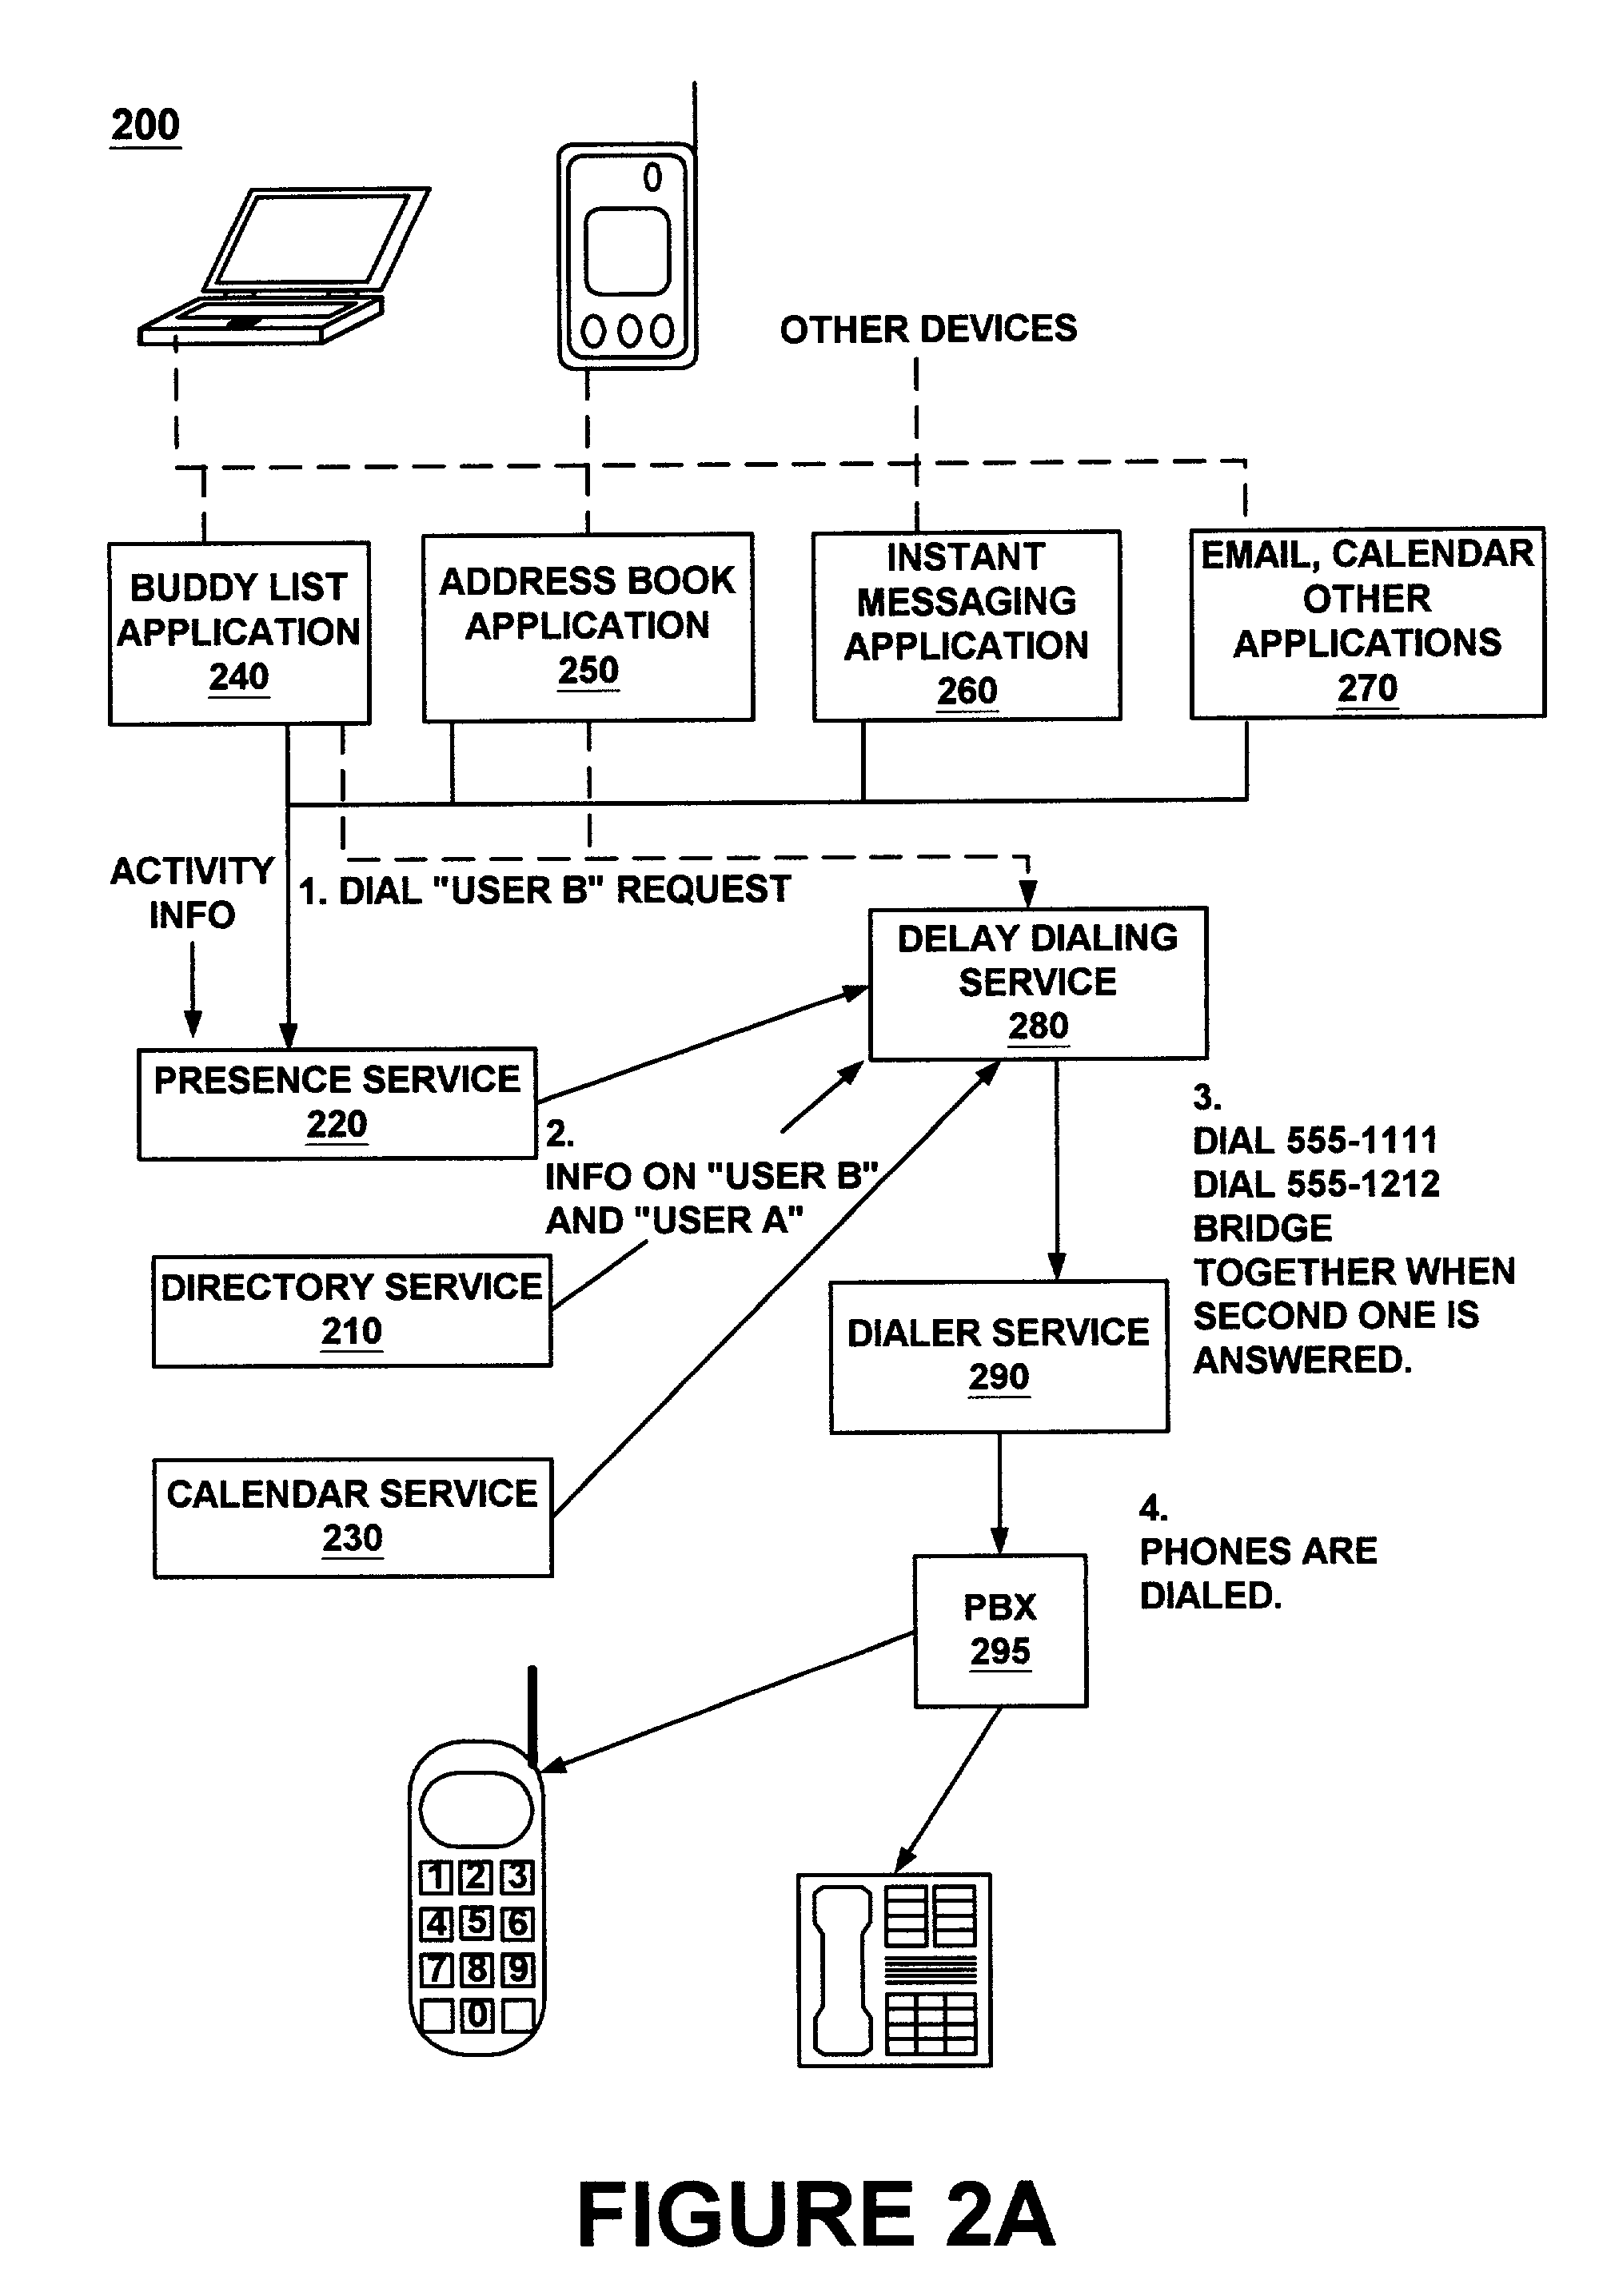 System and method of using presence information to delay dialing phone calls initiated by a caller to a callee